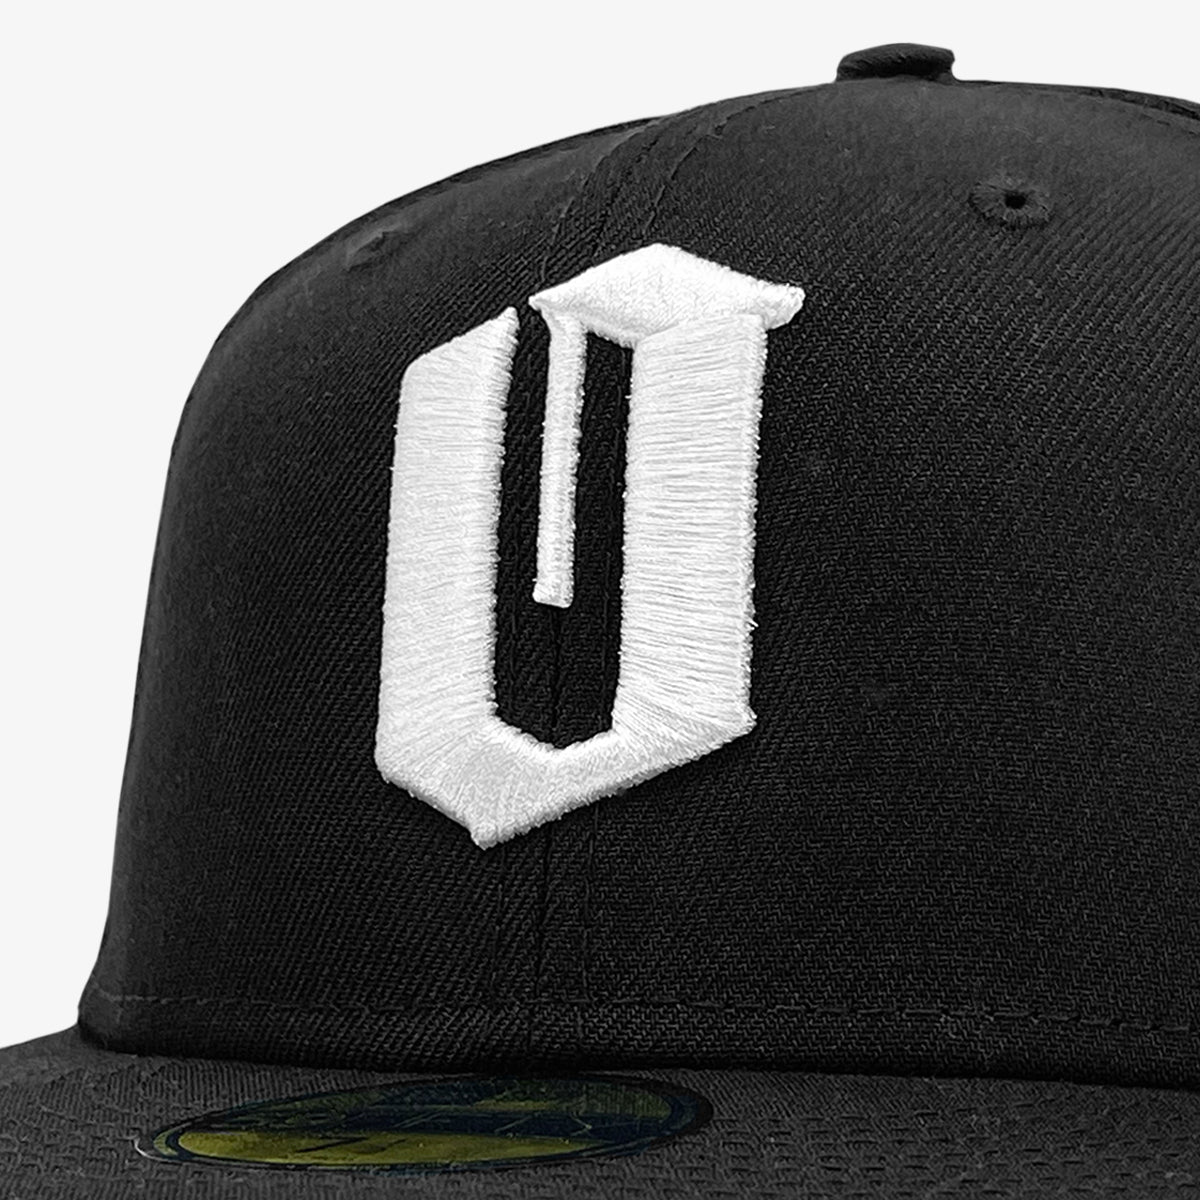 Close up of white embroidered O for Oakland on black New Era cap.